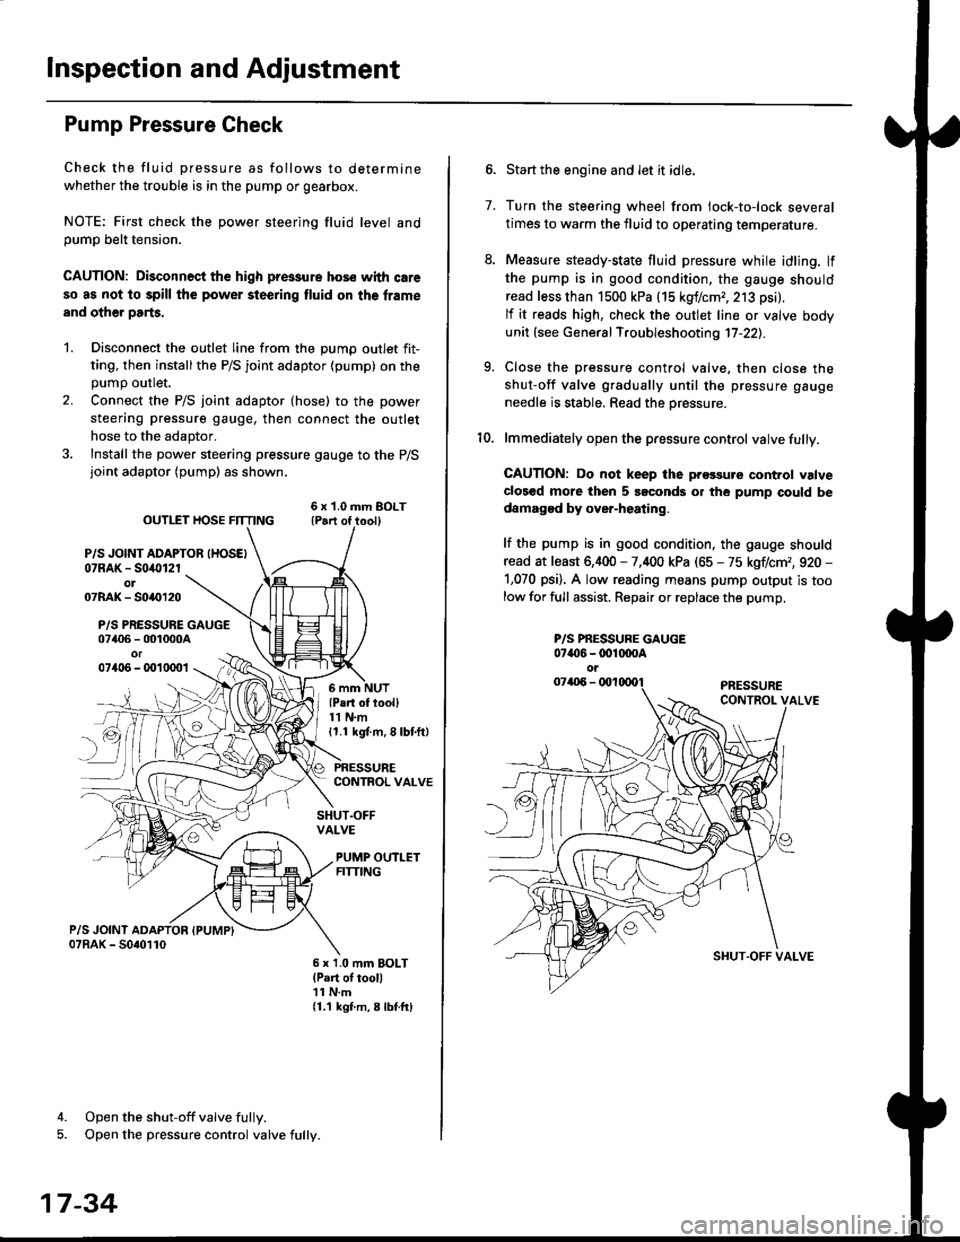 HONDA CIVIC 1996 6.G Workshop Manual lnspection and Adjustment
Pump Pressure Check
Check the fluid pressure as follows to determine
whether the trouble is in the pump or gearbox.
NOTE: First check the power steering fluid level andpump b